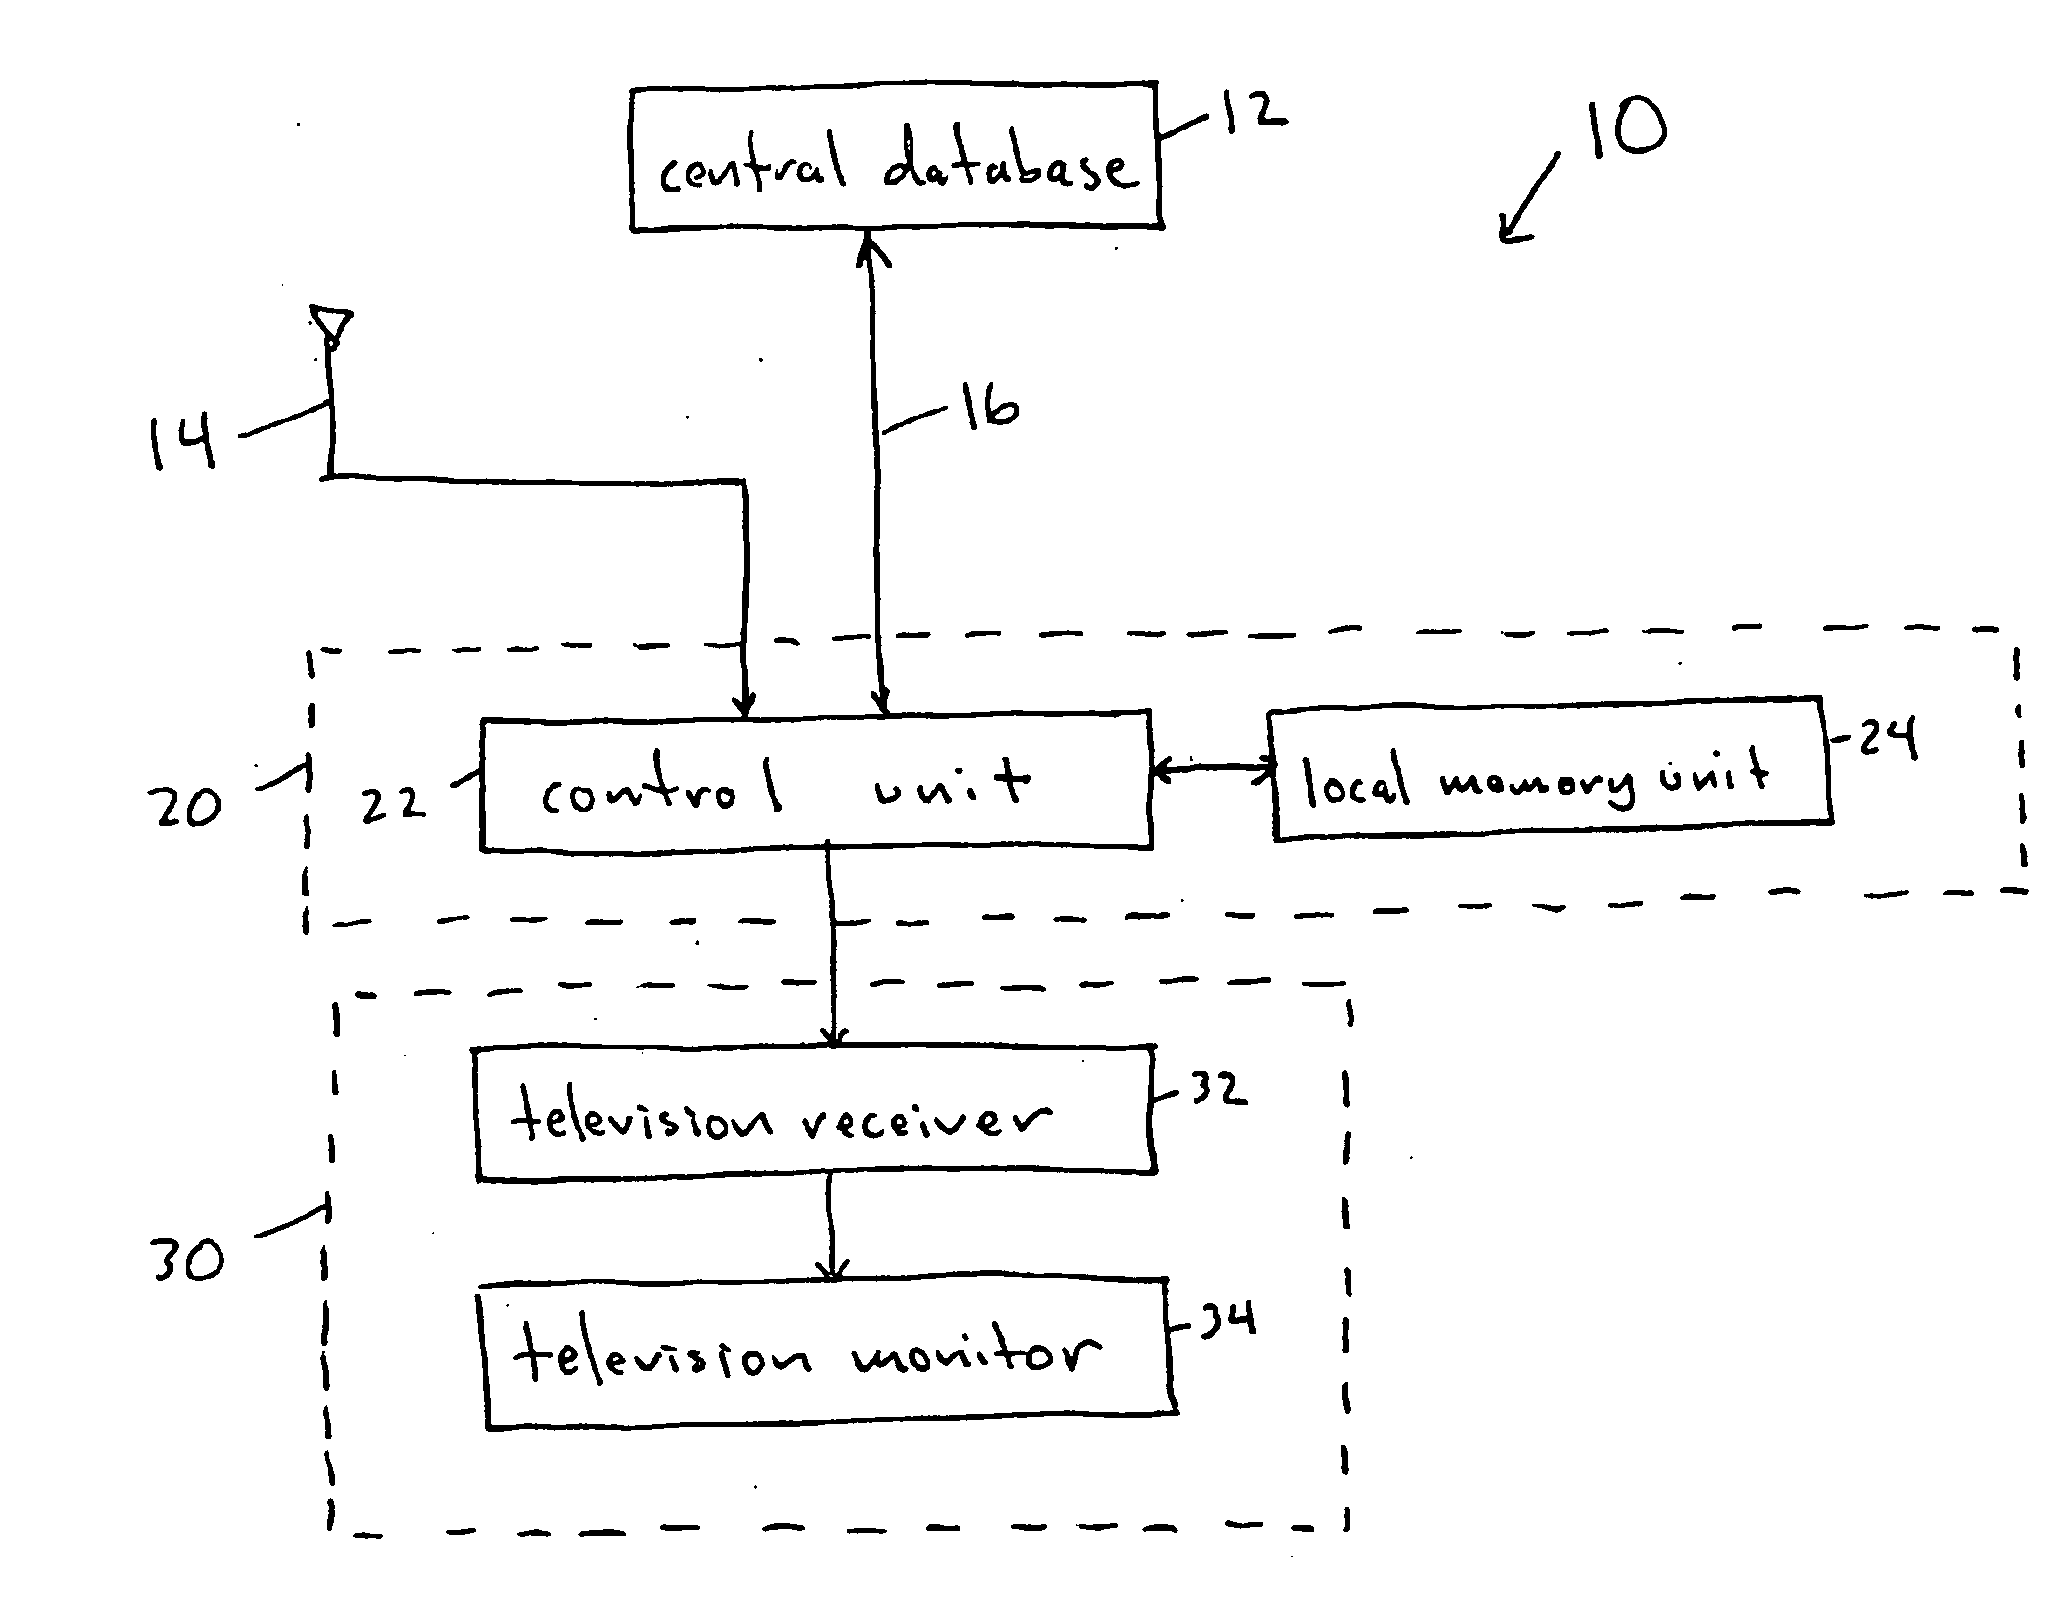 Method and apparatus for detecting radio content